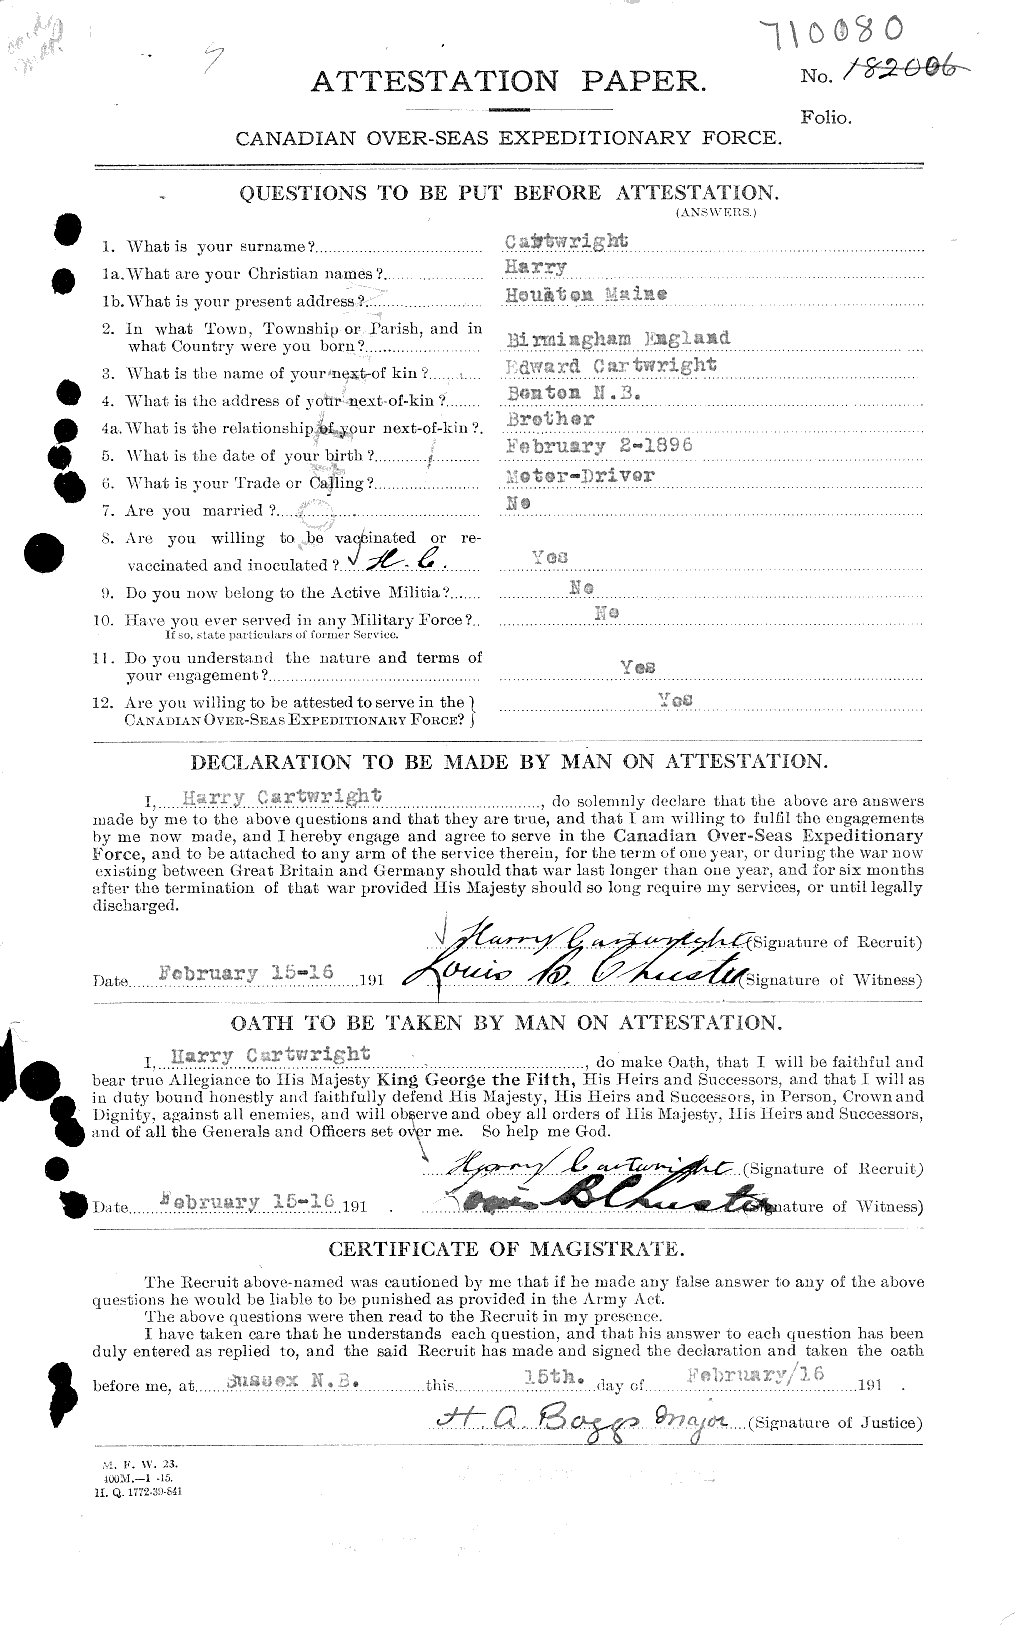 Personnel Records of the First World War - CEF 011587a